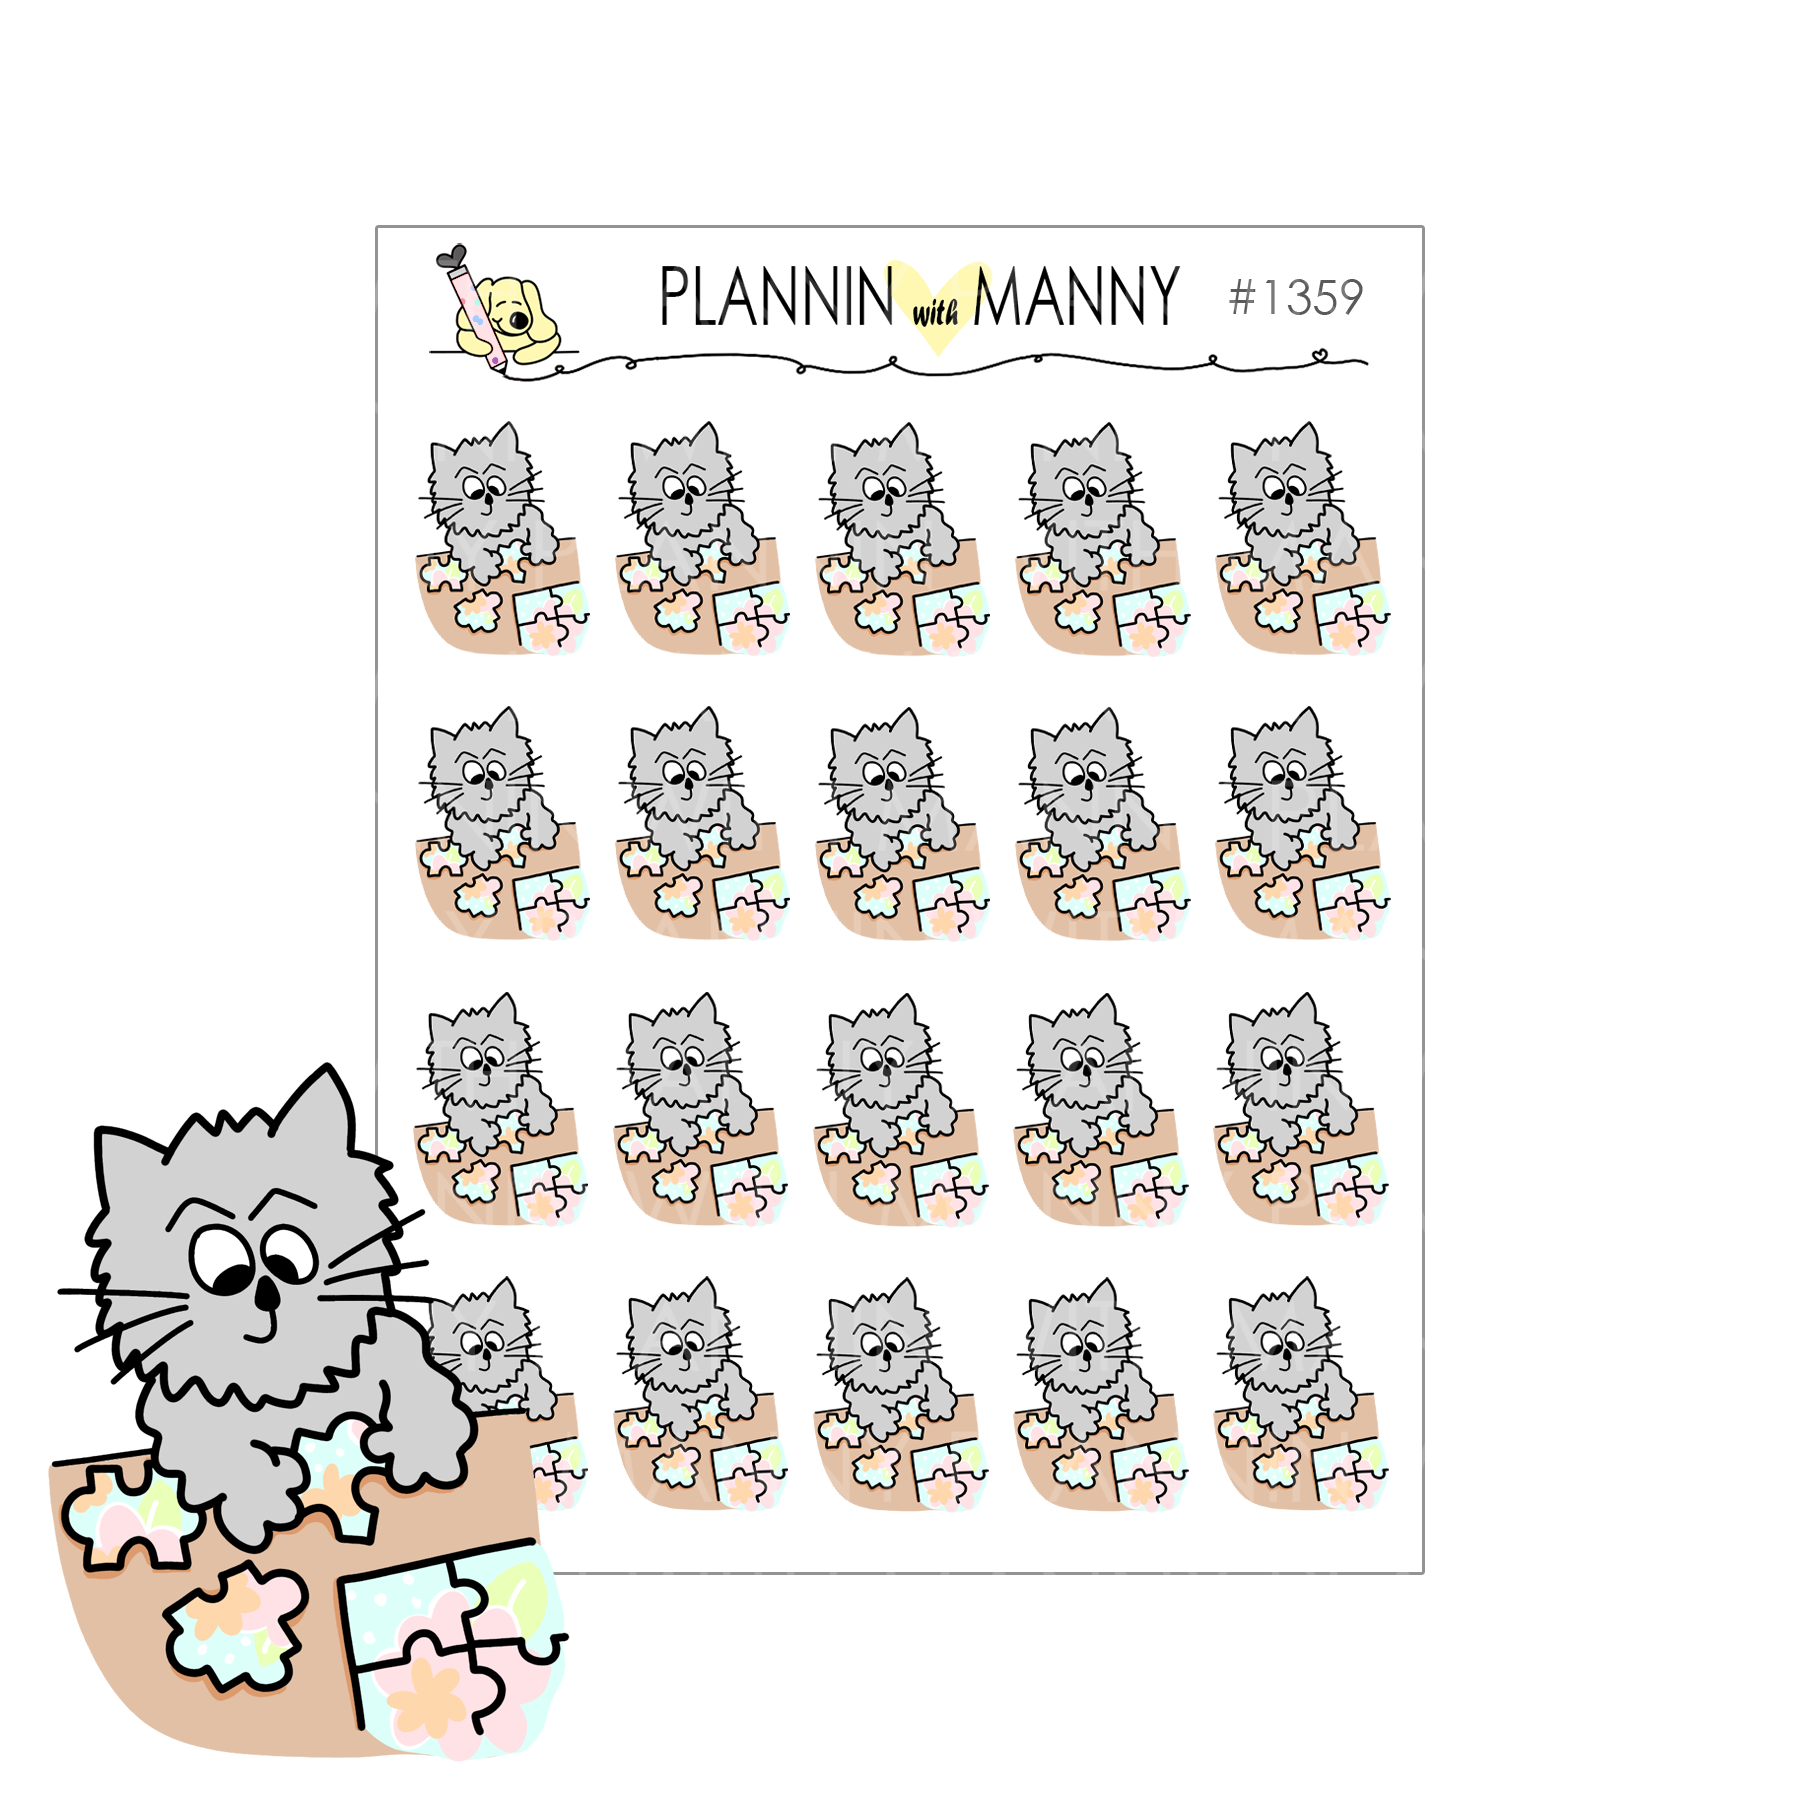 1359 Puzzle Time Planner Stickers